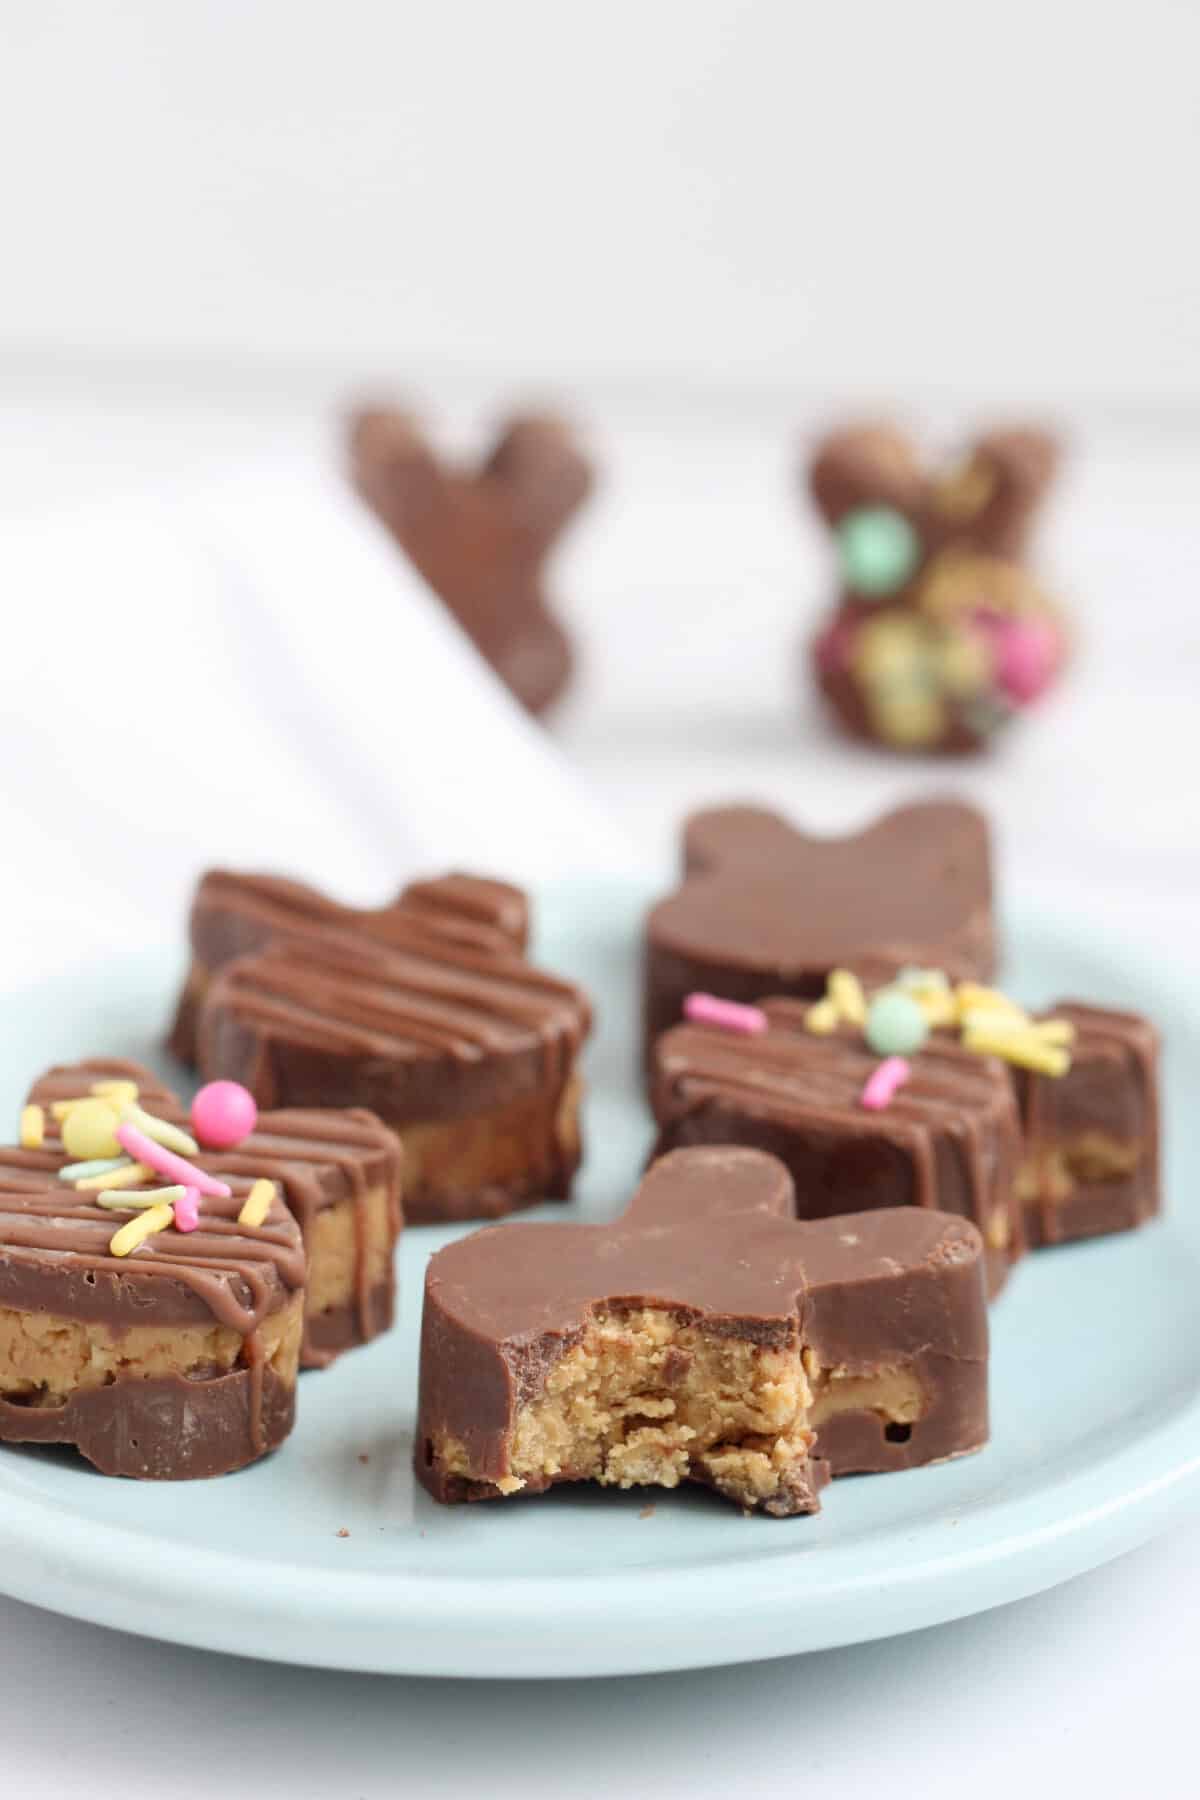 peanut butter cup bunnies on a blue plate with a bite out of one of the bunnies